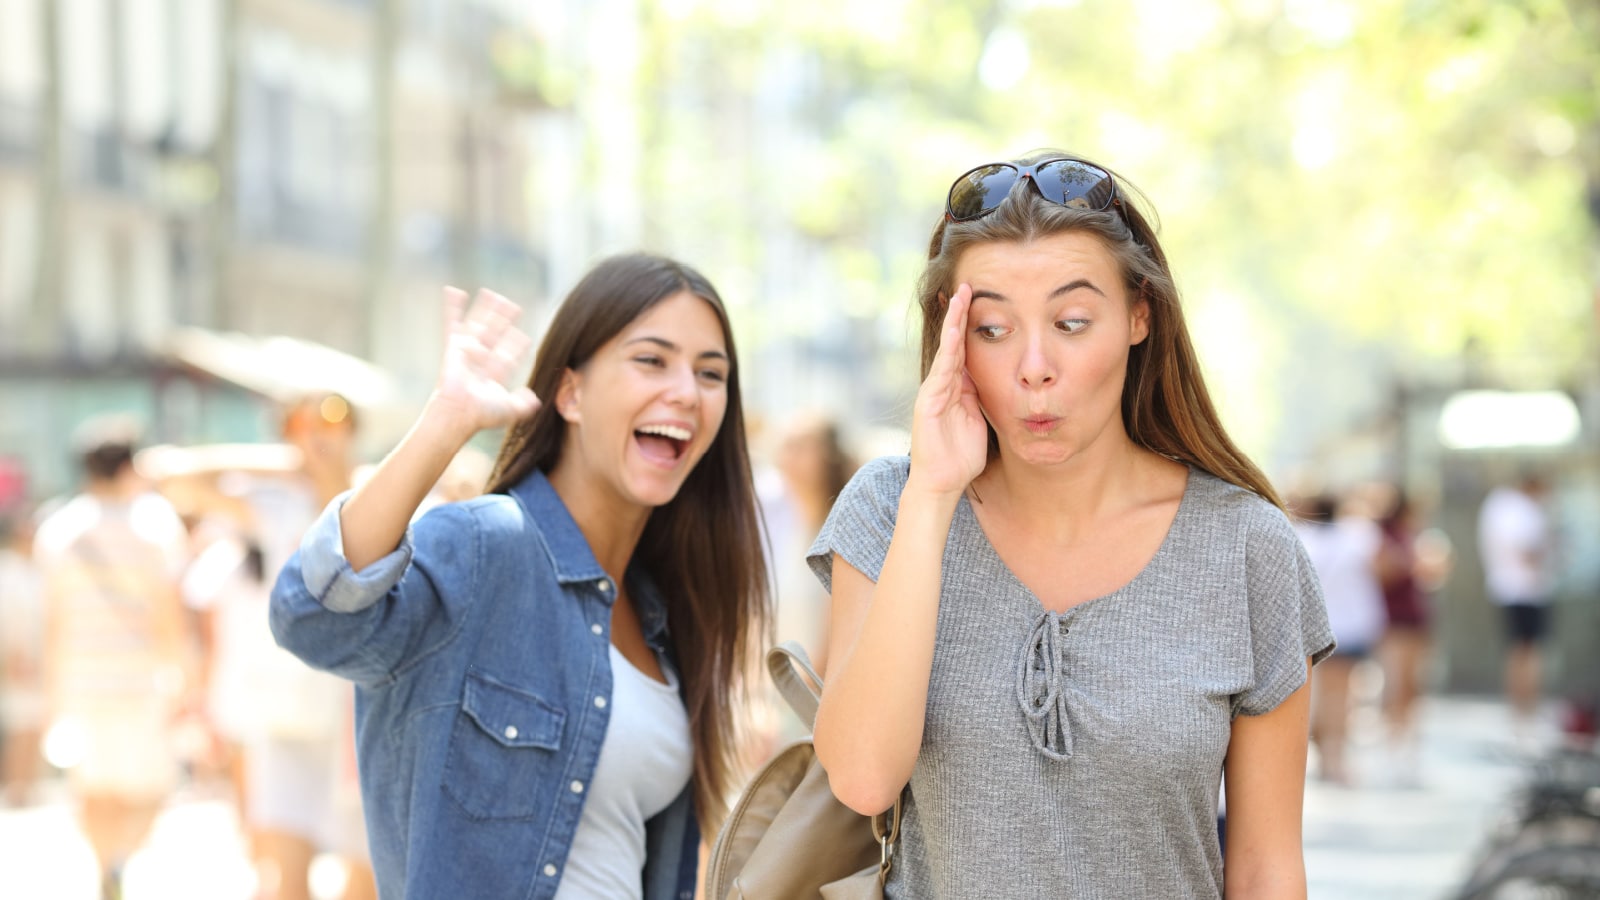 Happy teen greeting waving hand and friend ignoring her in the street